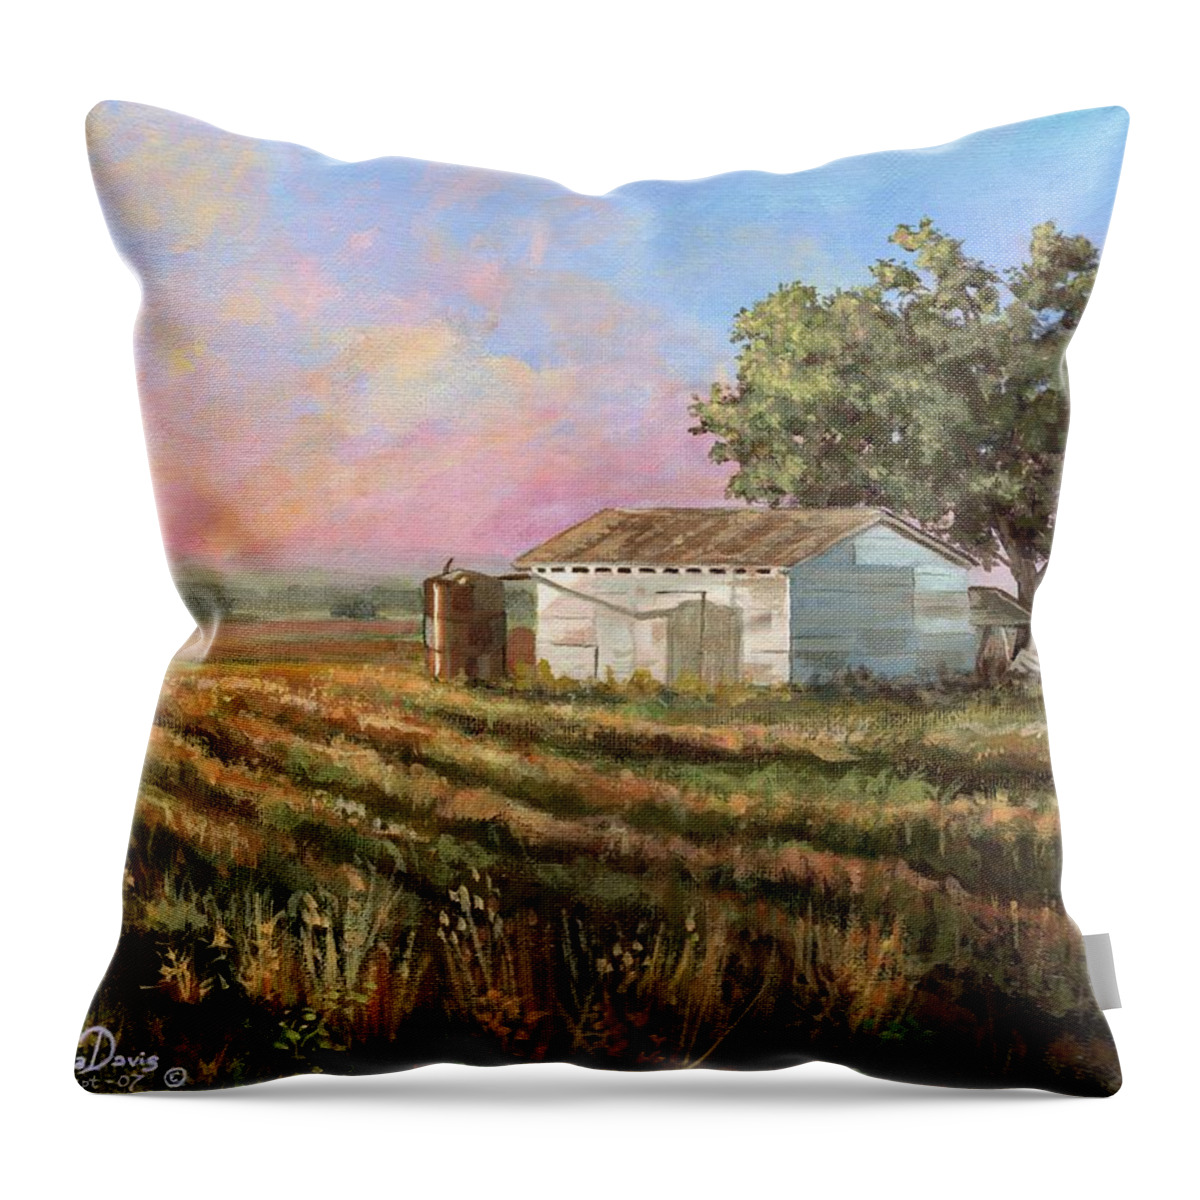 Texas Throw Pillow featuring the painting Rich Morning by Mona Davis